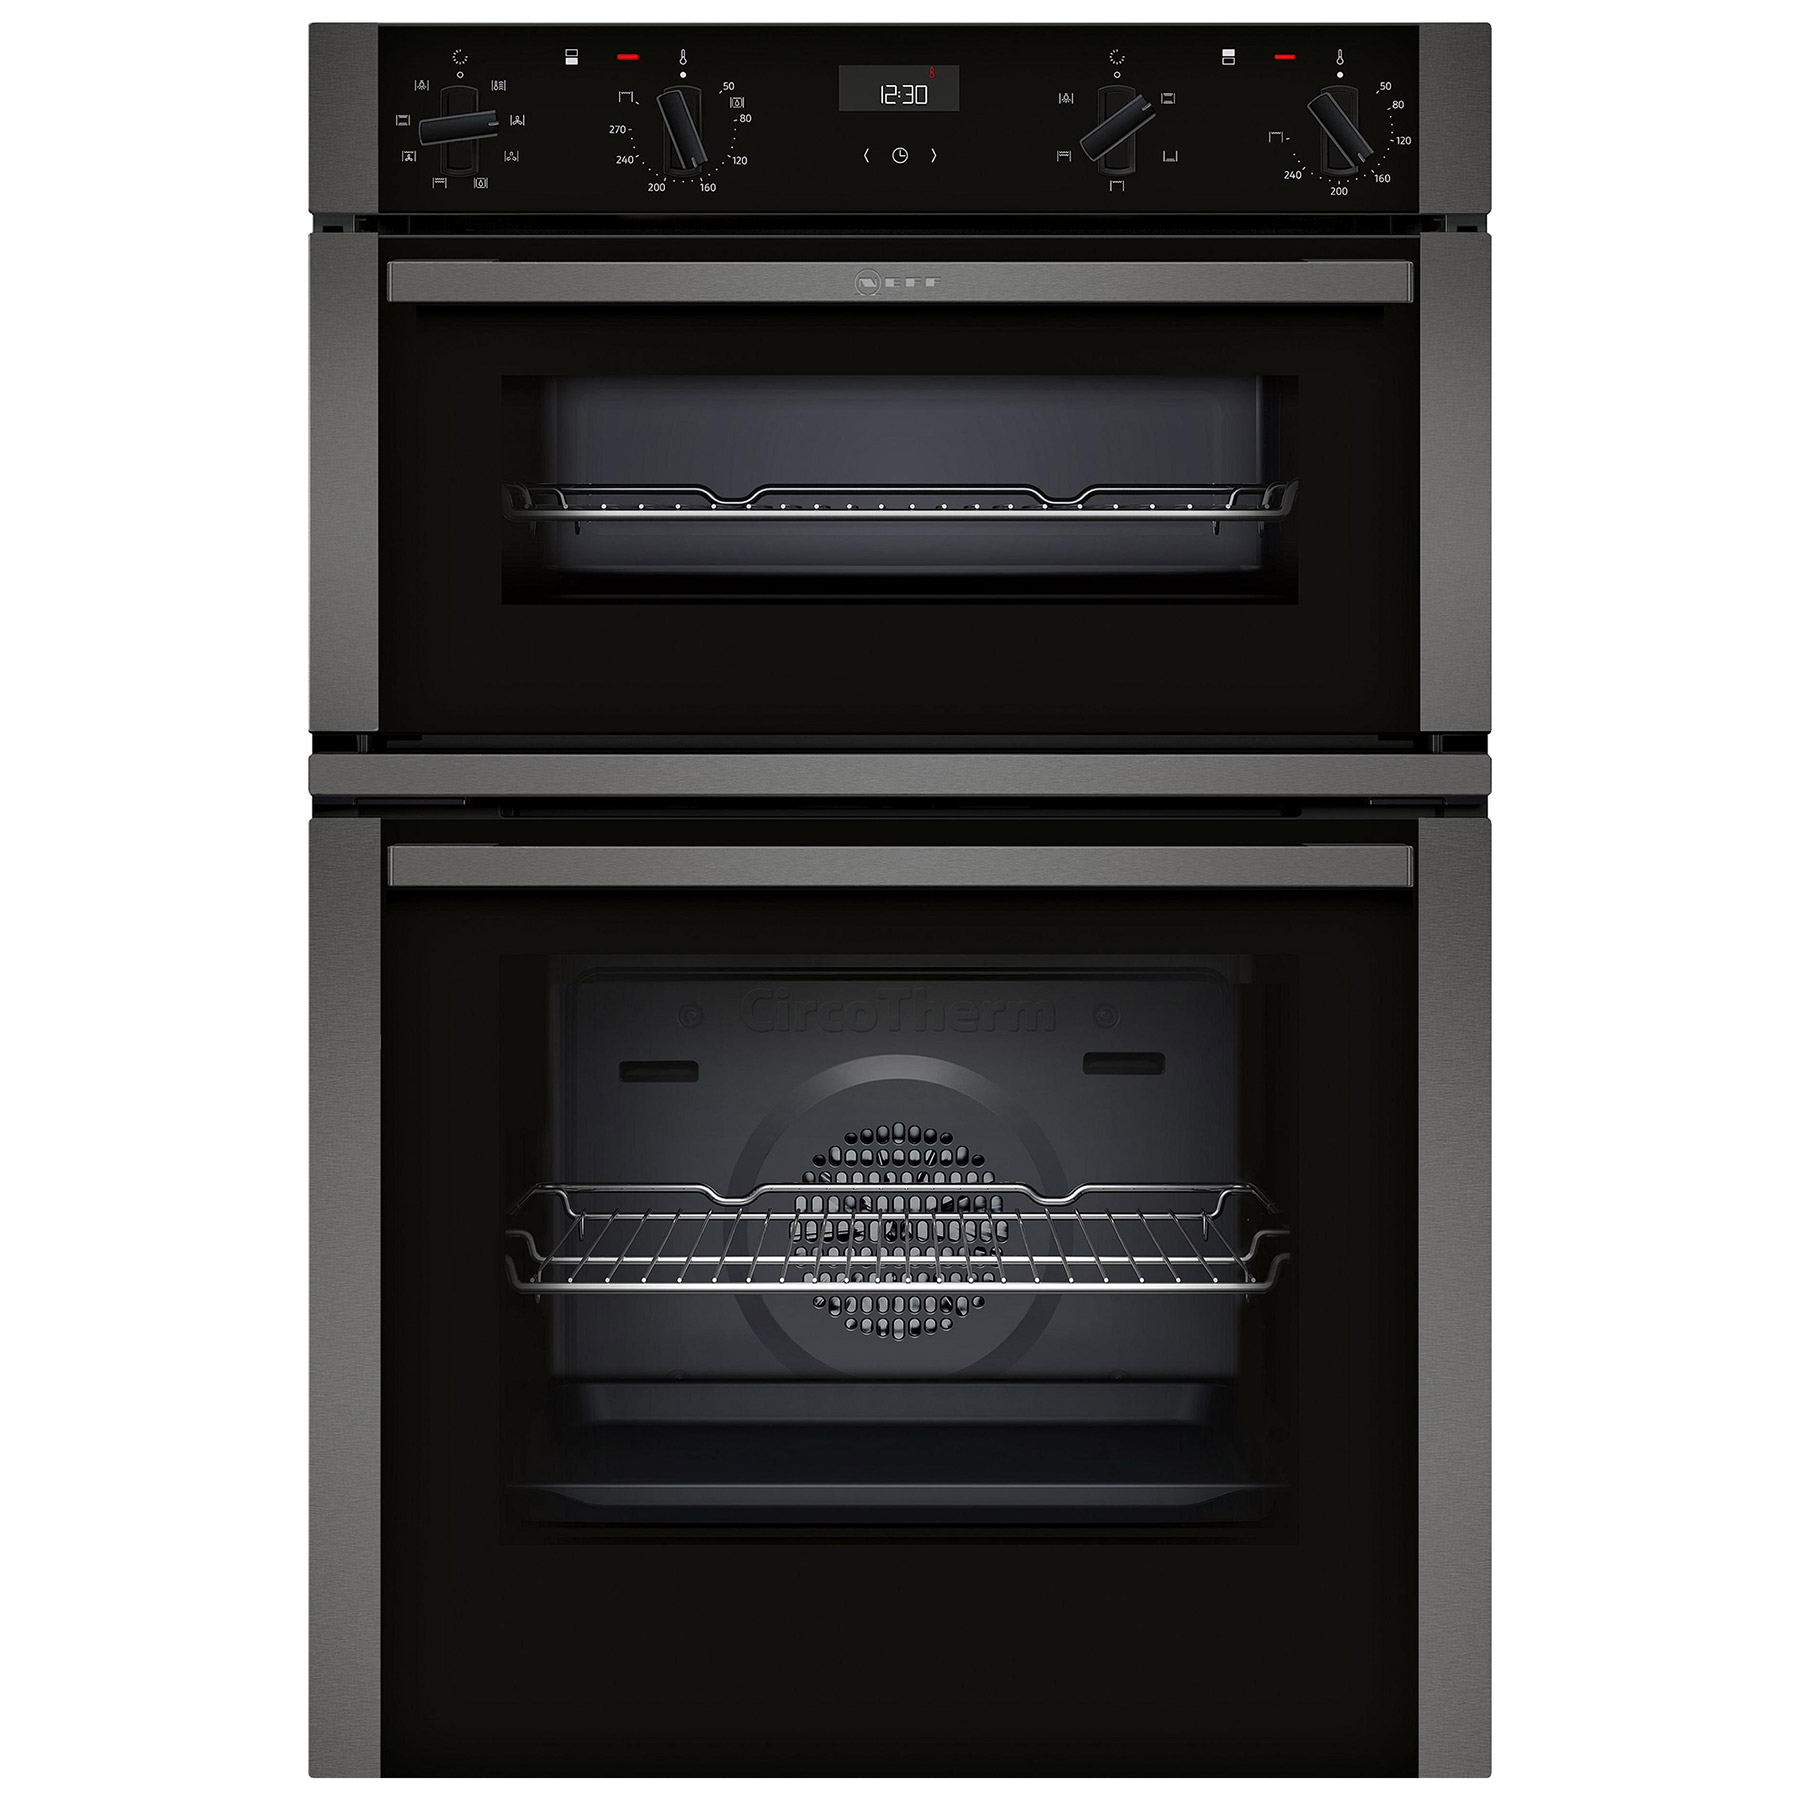 Neff U1ACE2HG0B N50 88cm Built In Electric Double Oven Black Graphite